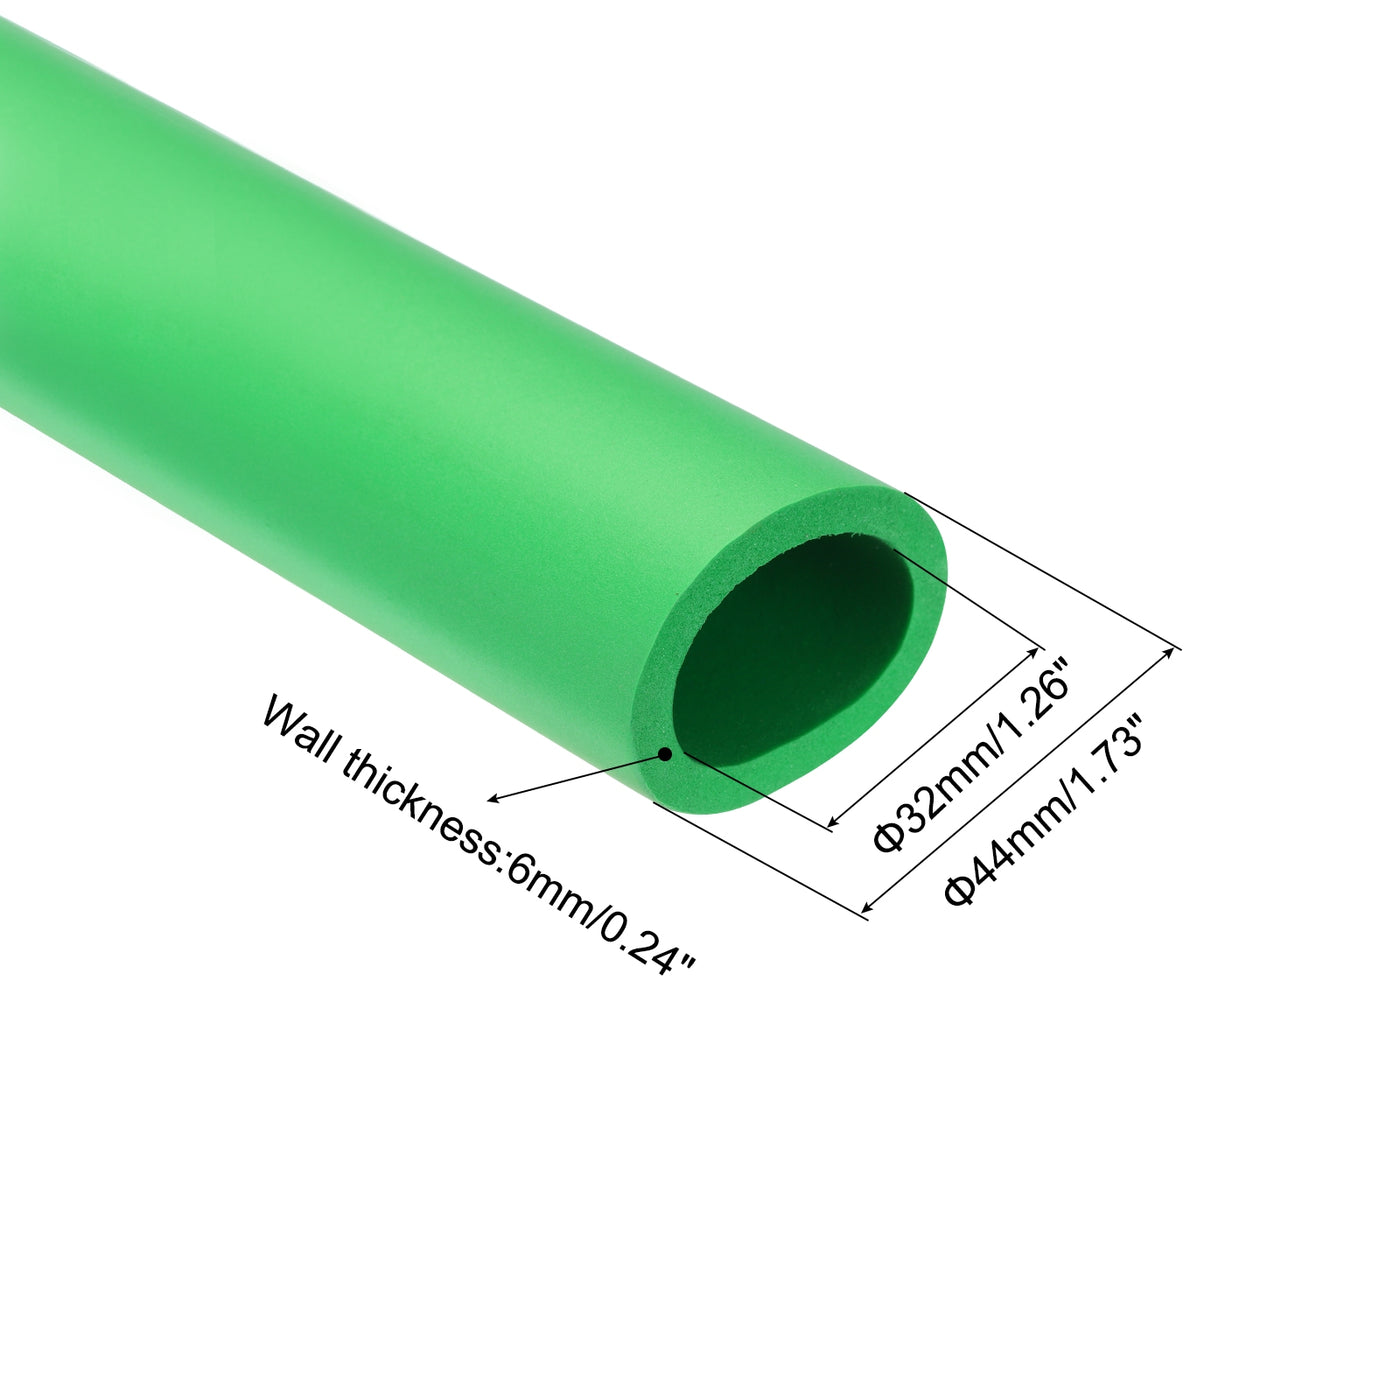 uxcell Uxcell 2pcs 3.3ft Pipe Insulation Tube 1 1/4 Inch(32mm) ID 44mm OD Foam Tubing for Handle Grip Support, Green